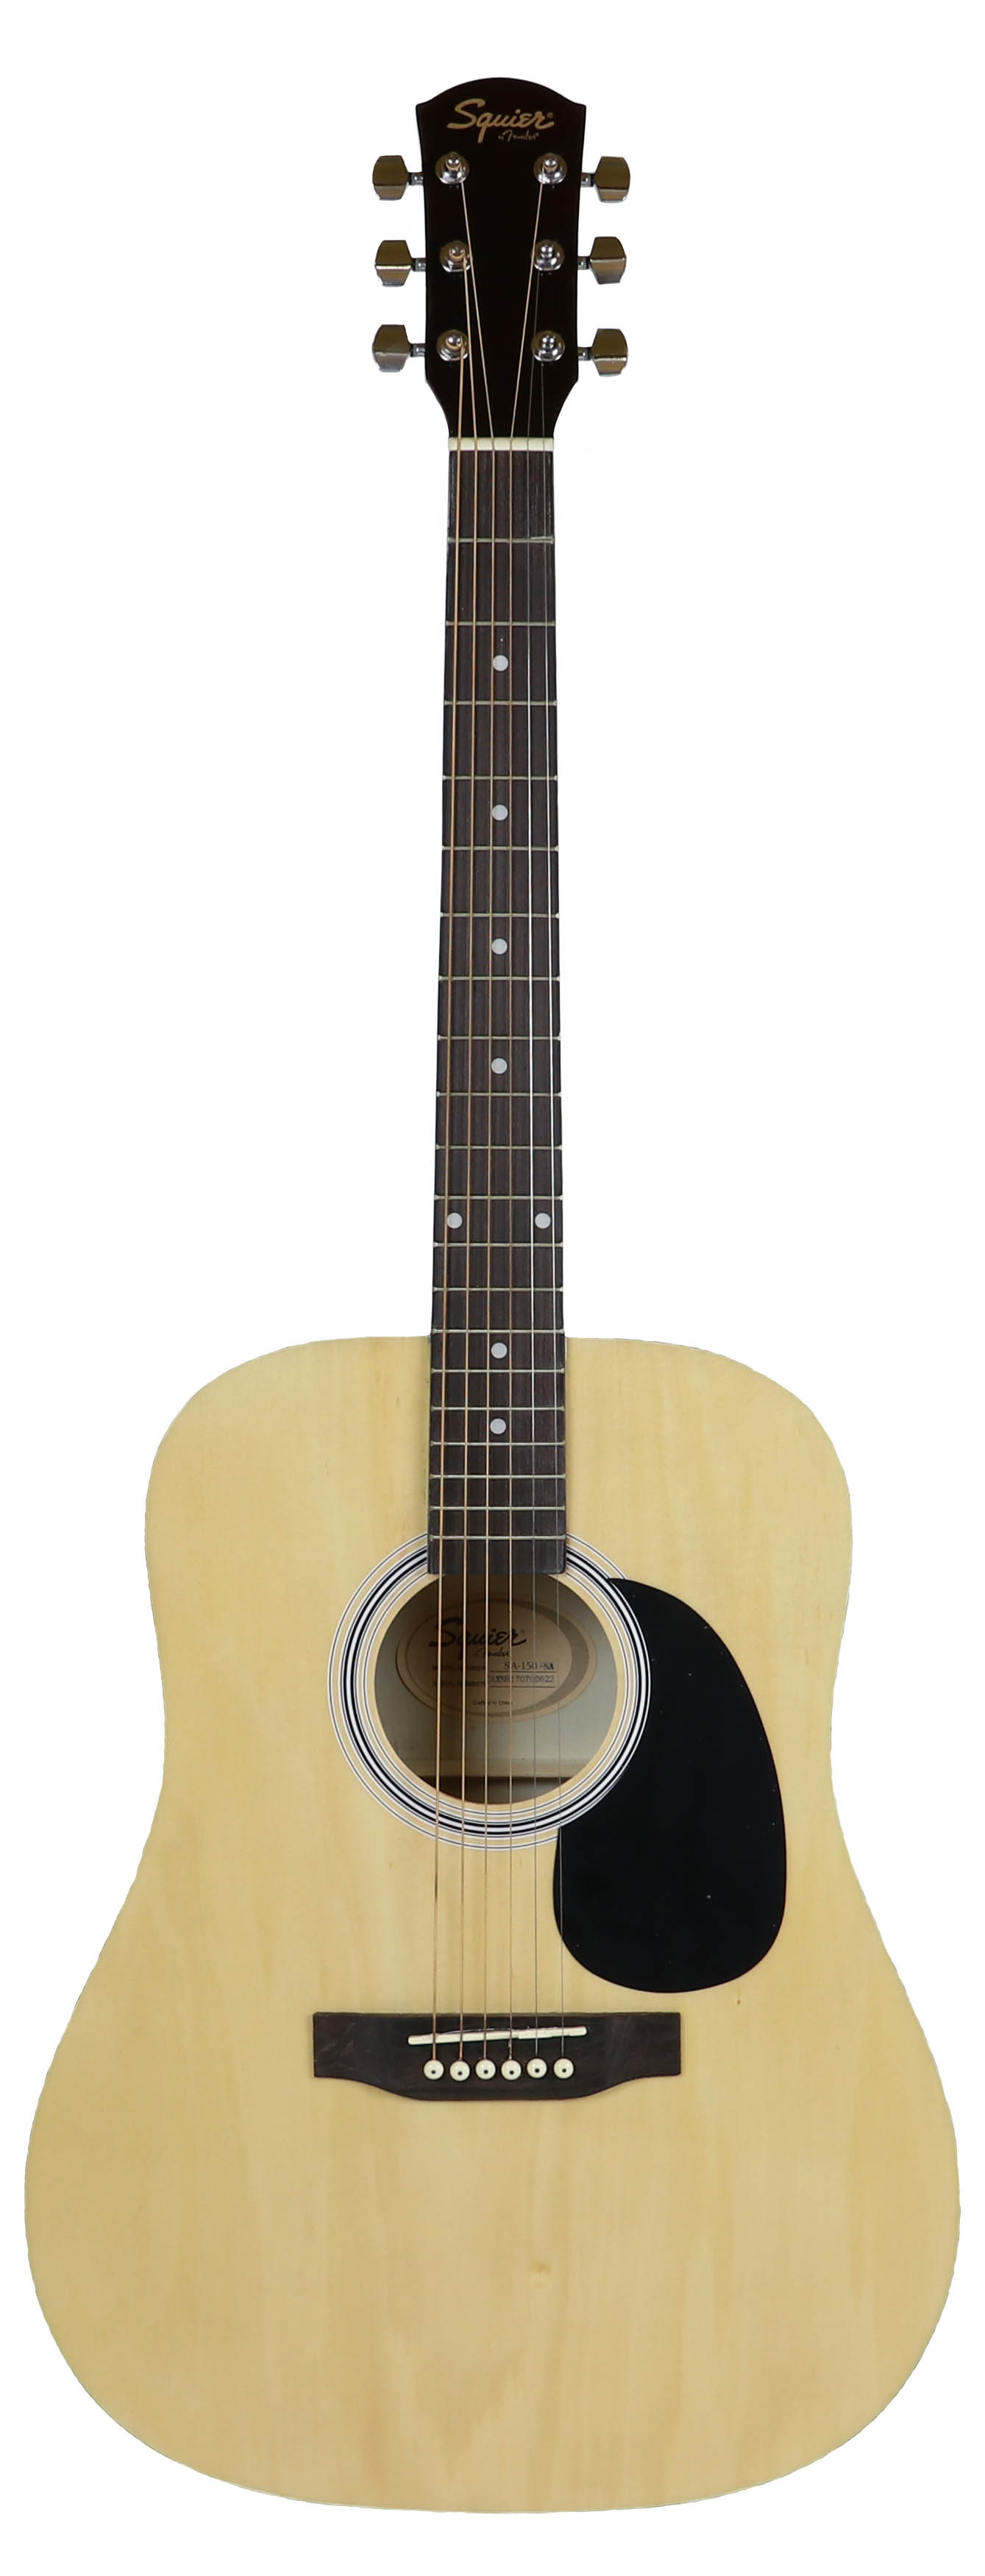 Squier by Fender Sa-150 Dreadnought Acoustic Guitar - Natural for